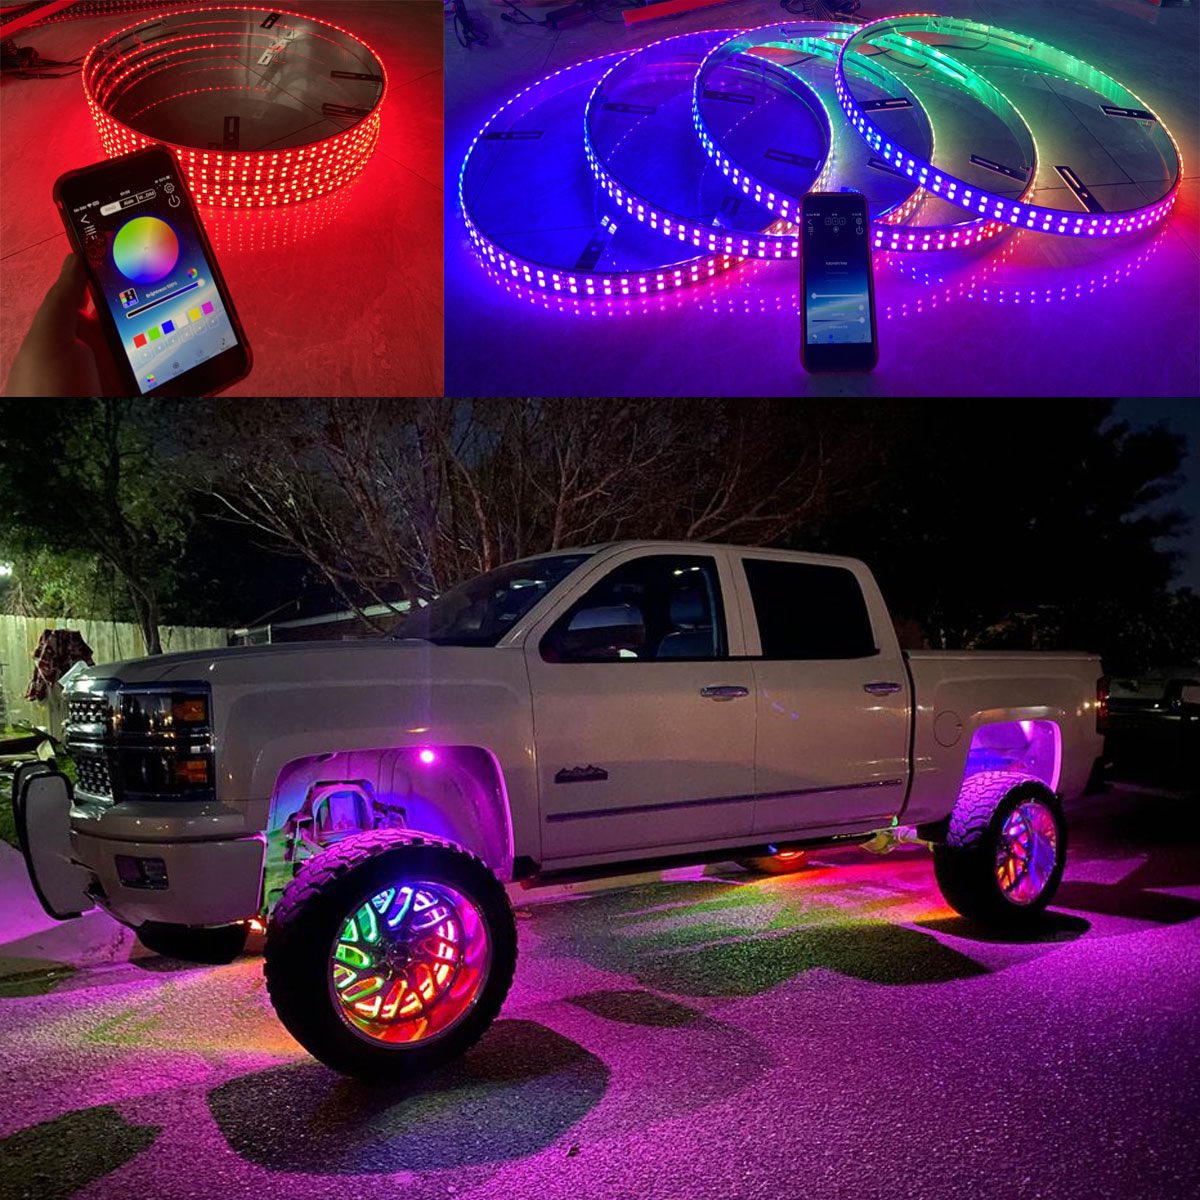 Sando Tech 15.5‘’ Pure White Dual Row Solid Color Solid Color Rim Light Up for Truck Vehical Offroad Led Wheel Ring Lights Tire Lights IP68 Waterproof Switch Ctrl 15.5 INCH Dual Row 